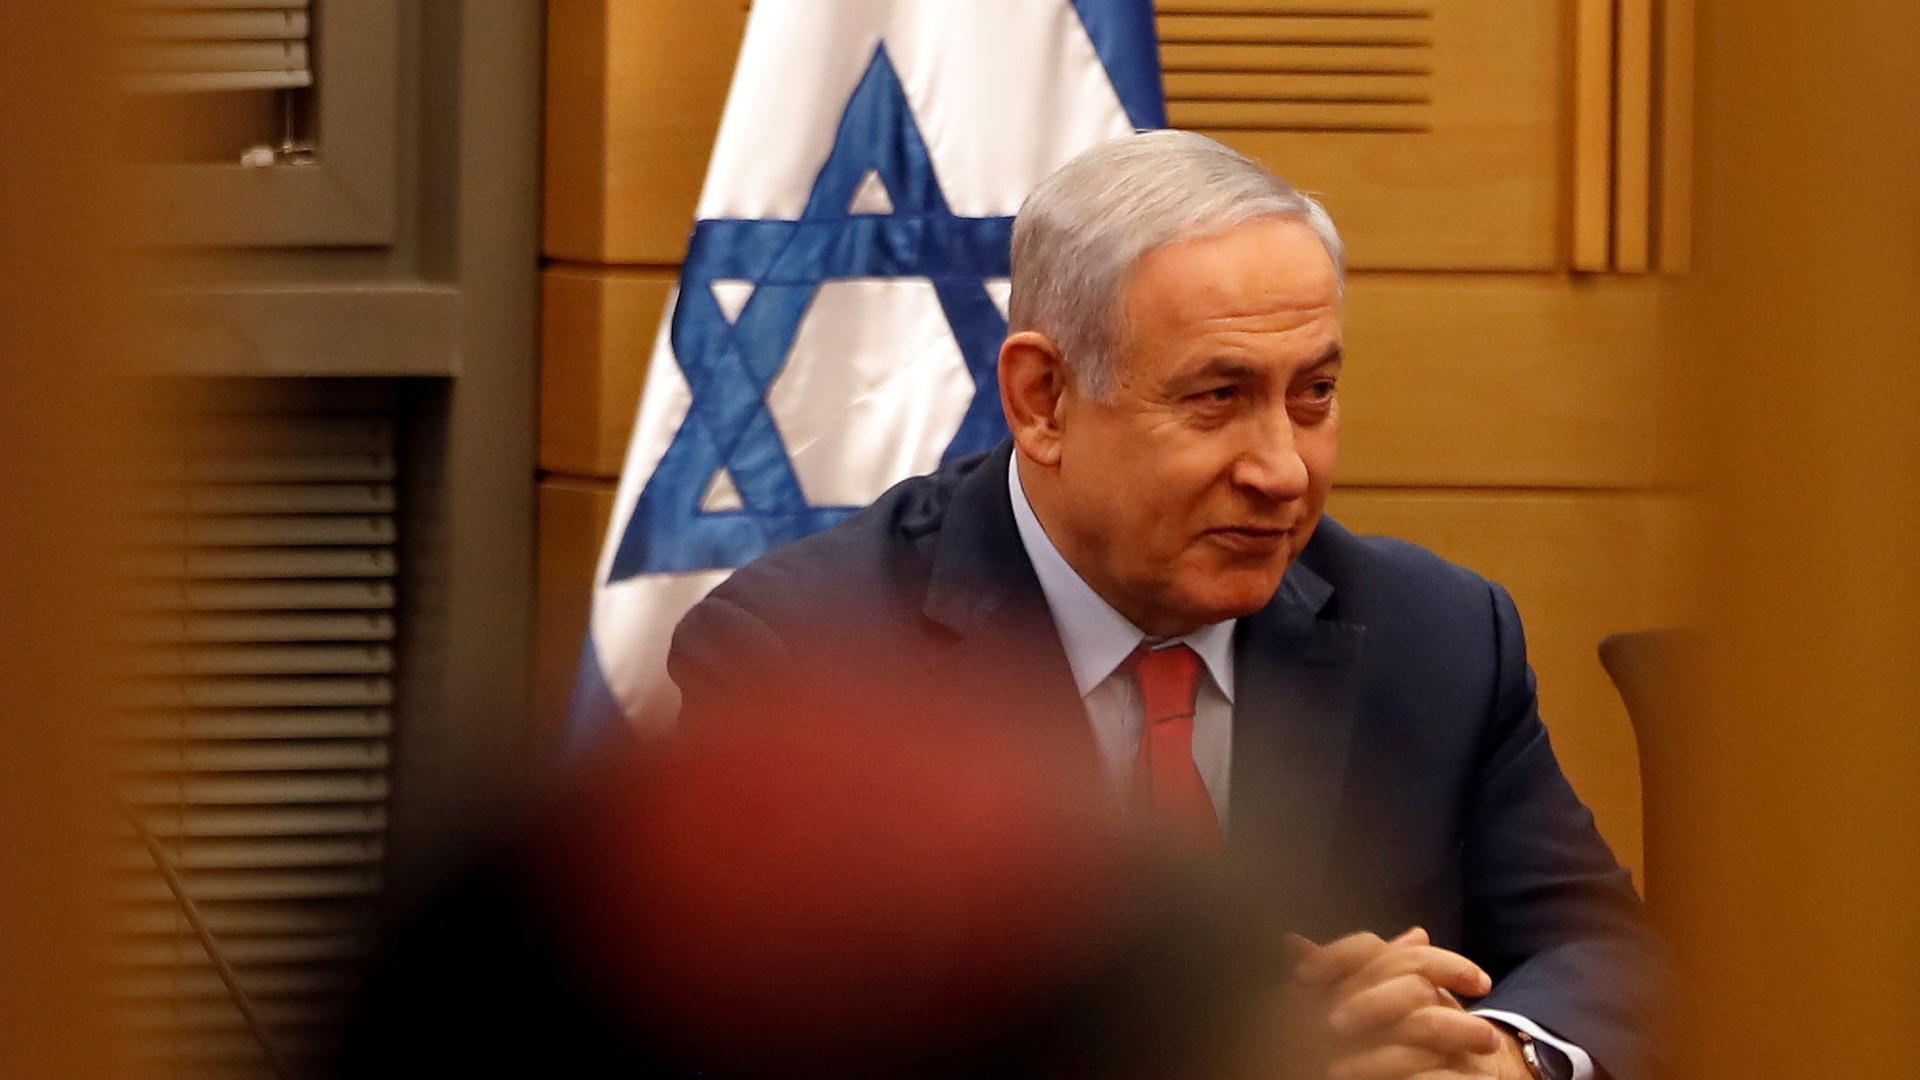 Israeli Prime Minister Benjamin Netanyahu is shown sitting with his hands folded and an Israeli flag behind him.